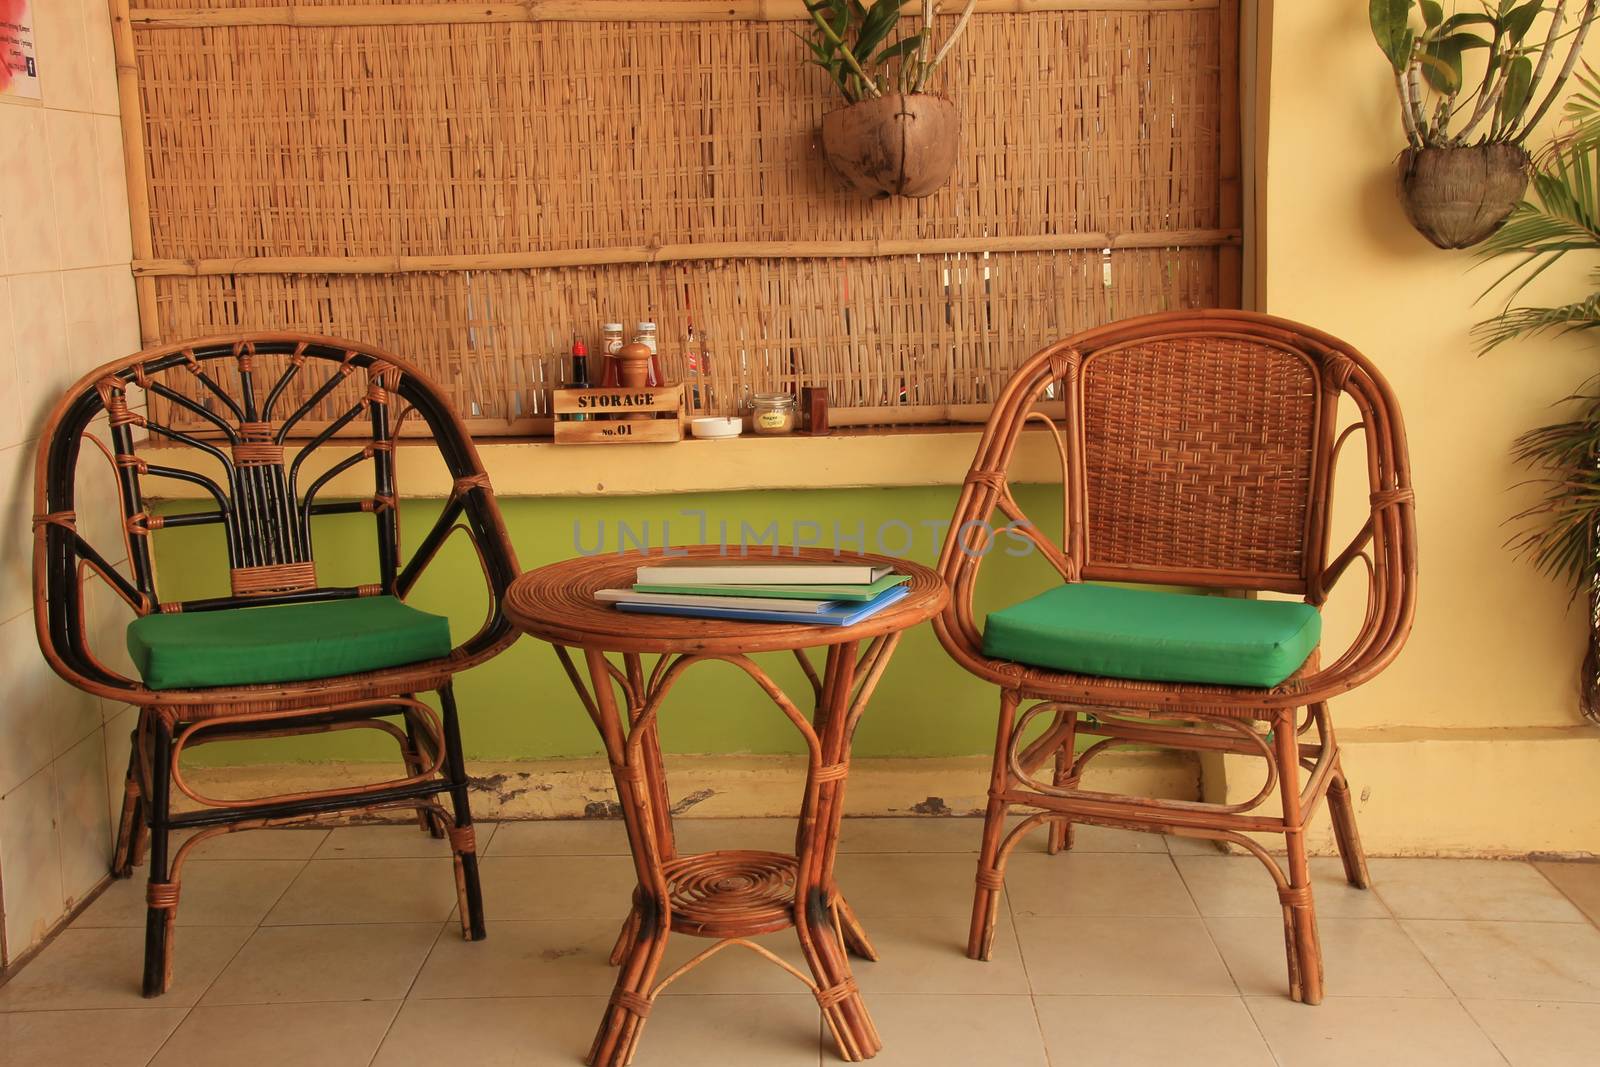 Rattan table and chairs by Sonnet15